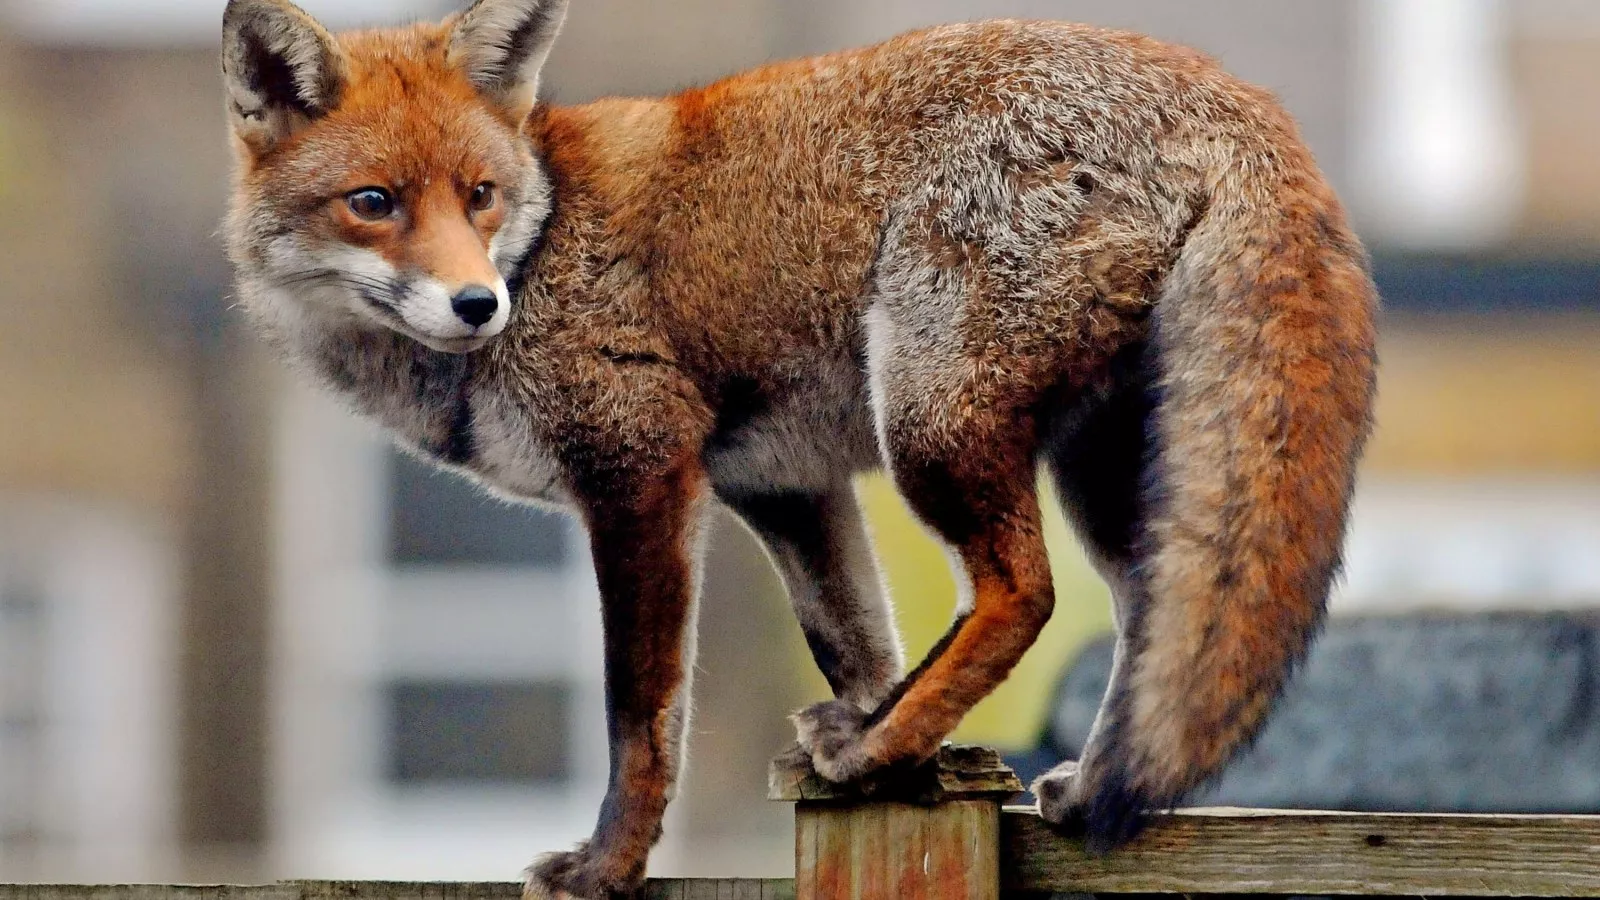 Red Fox That 'Bit or Nipped' Several at Capitol Tests Positive for Rabies